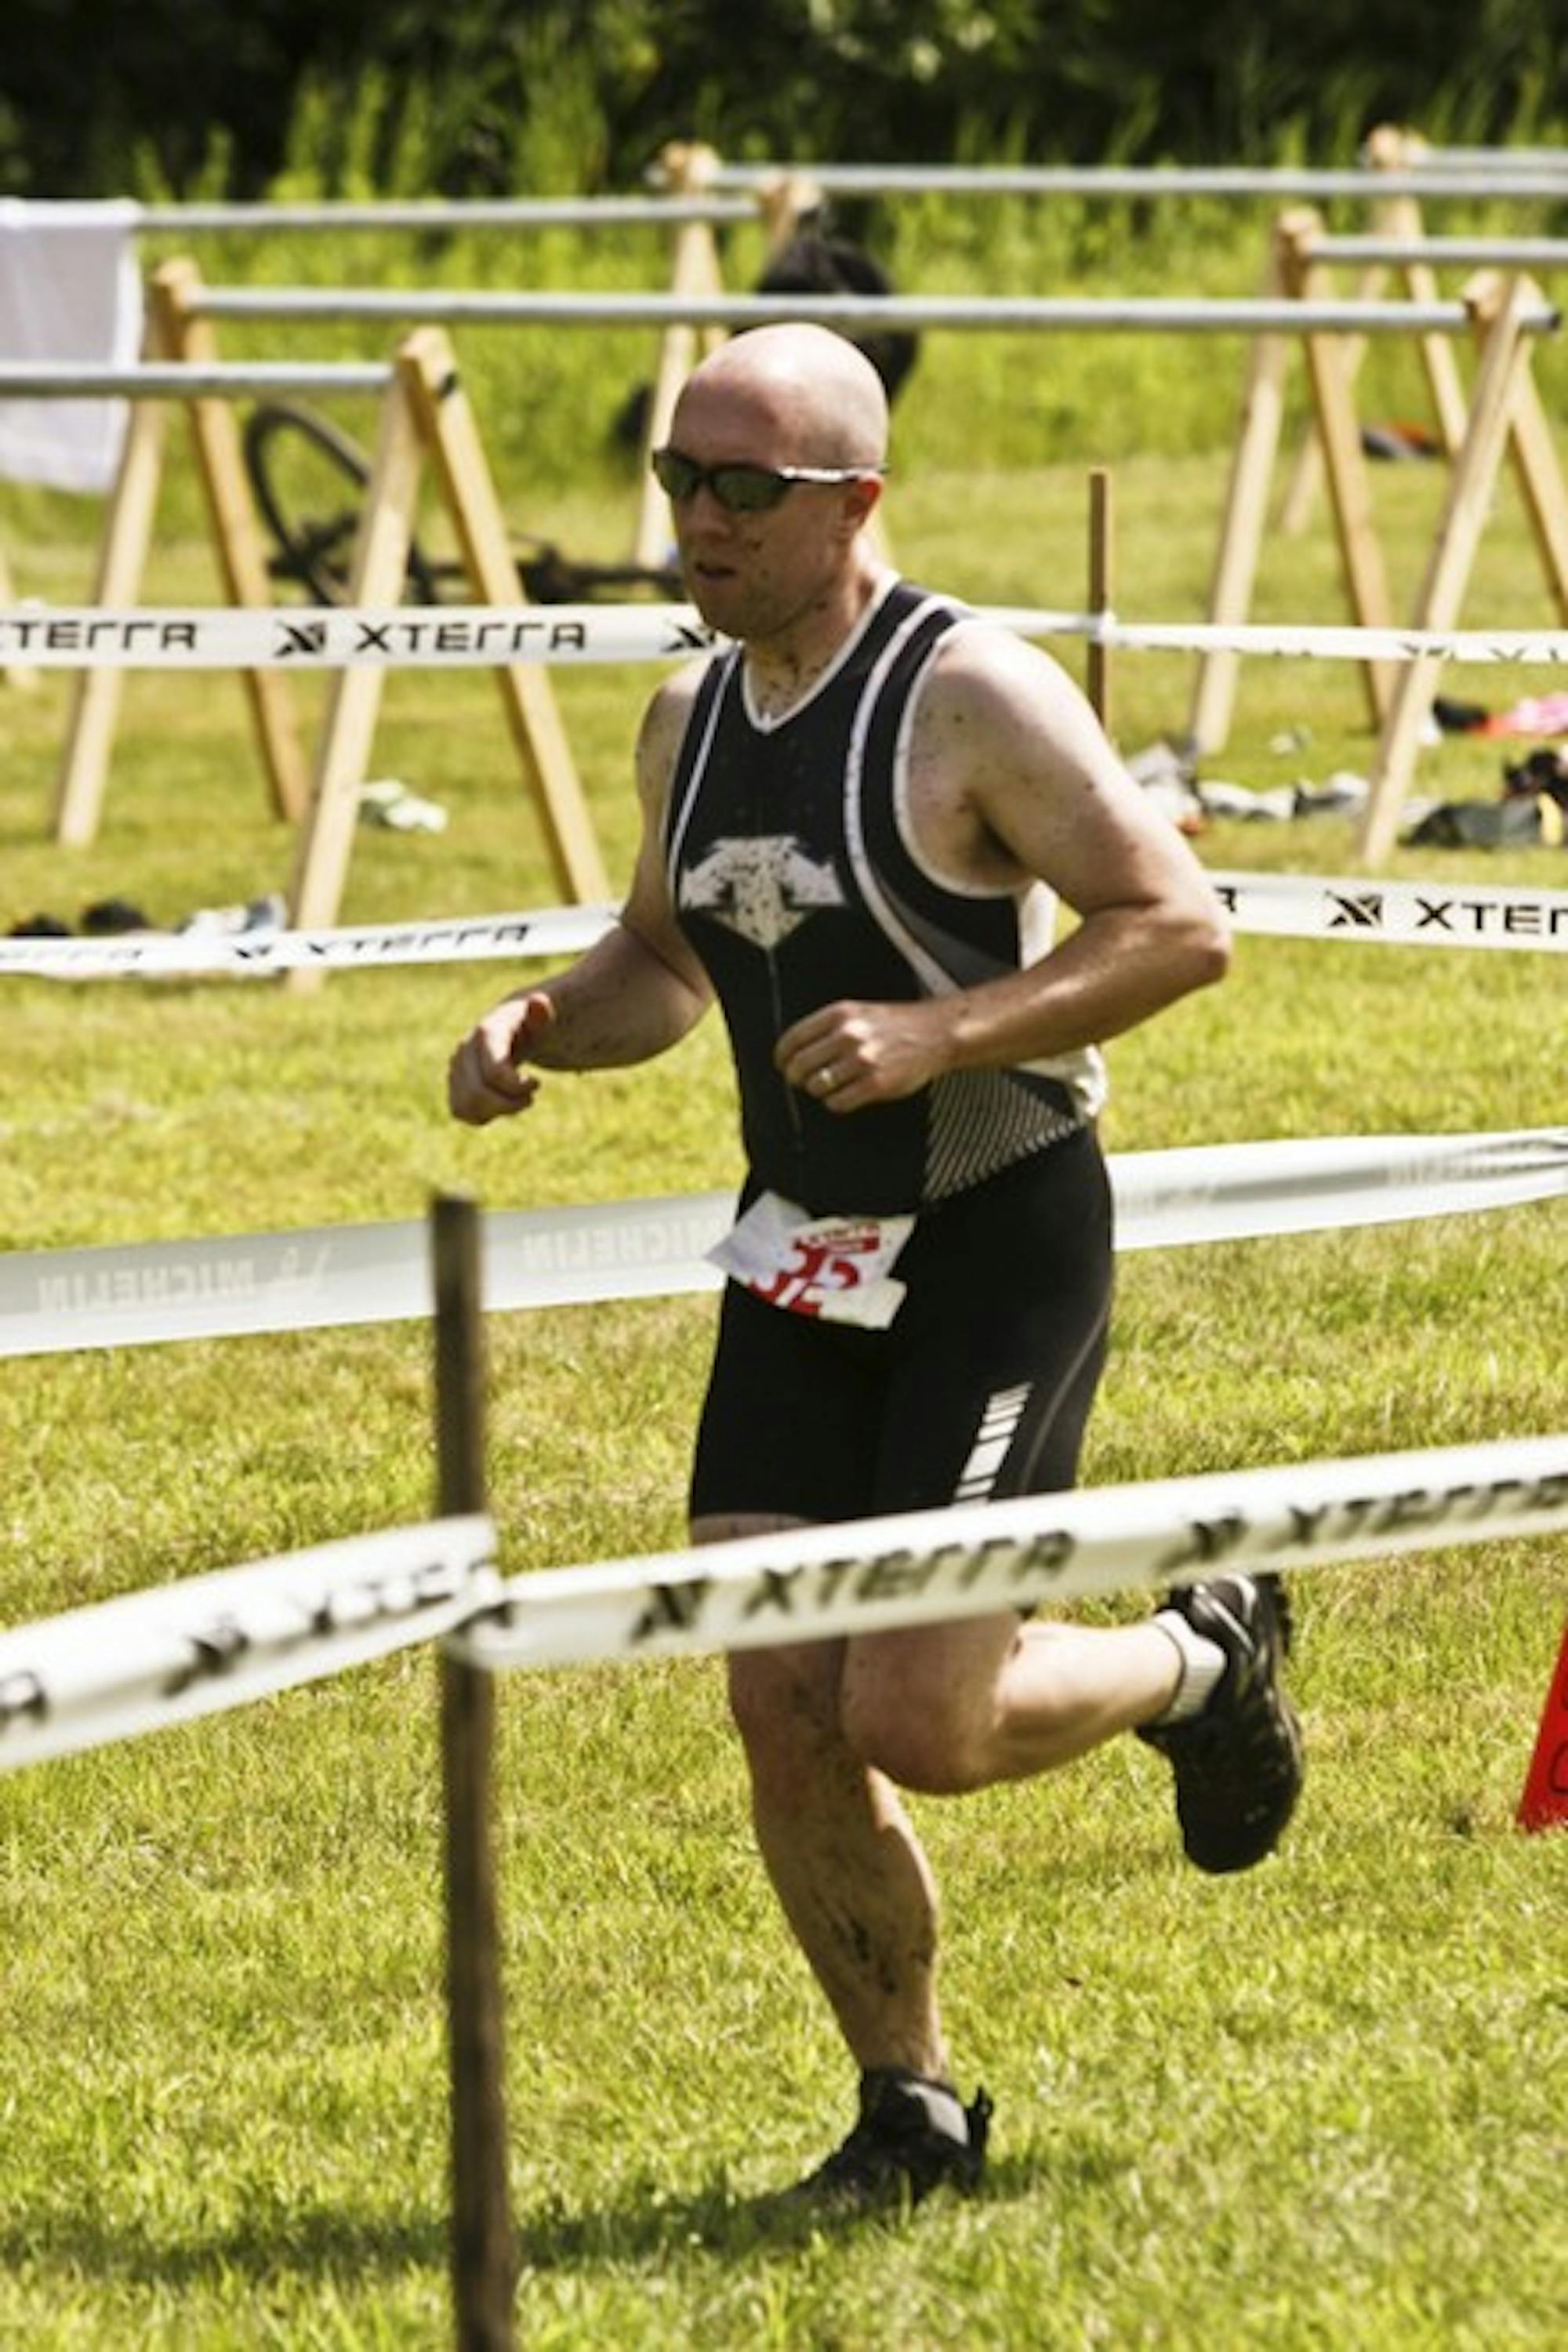 About 440 participants competed in the Stoaked Off-Road Triathlon at the Storrs Pond/Oak Hill Recreation Area on Saturday and Sunday.